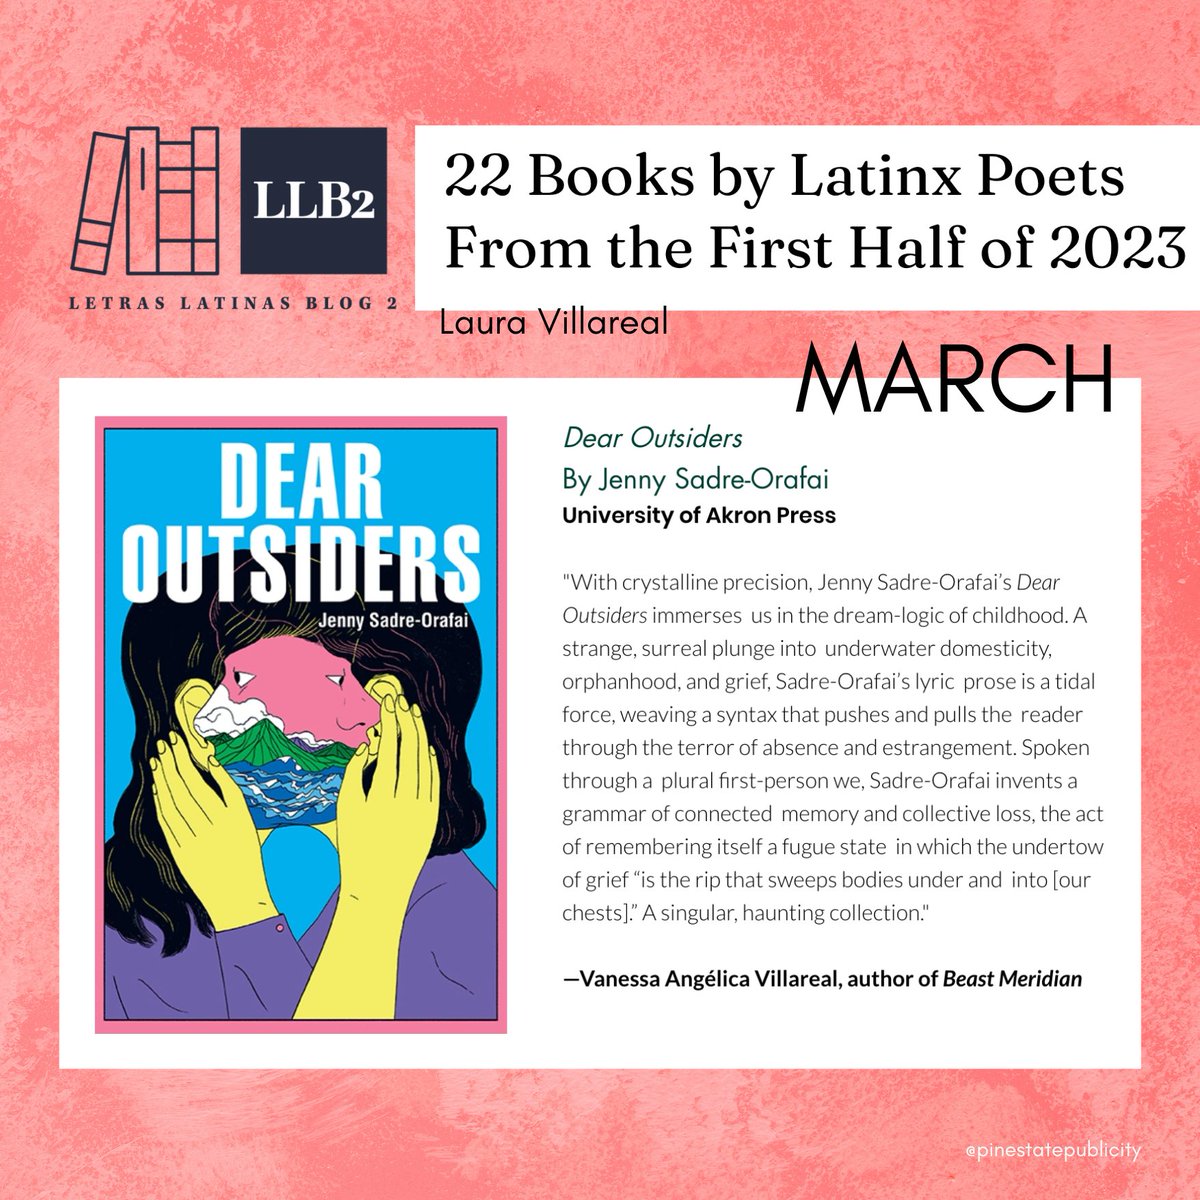 Jenny Sadre-Orafai's DEAR OUTSIDERS is a @LetrasLatinas can't miss poetry collection for March (and beyond!). It's never too late to get your copy of the book Vanessa Angélica Villareal calls 'a singular, haunting collection.'